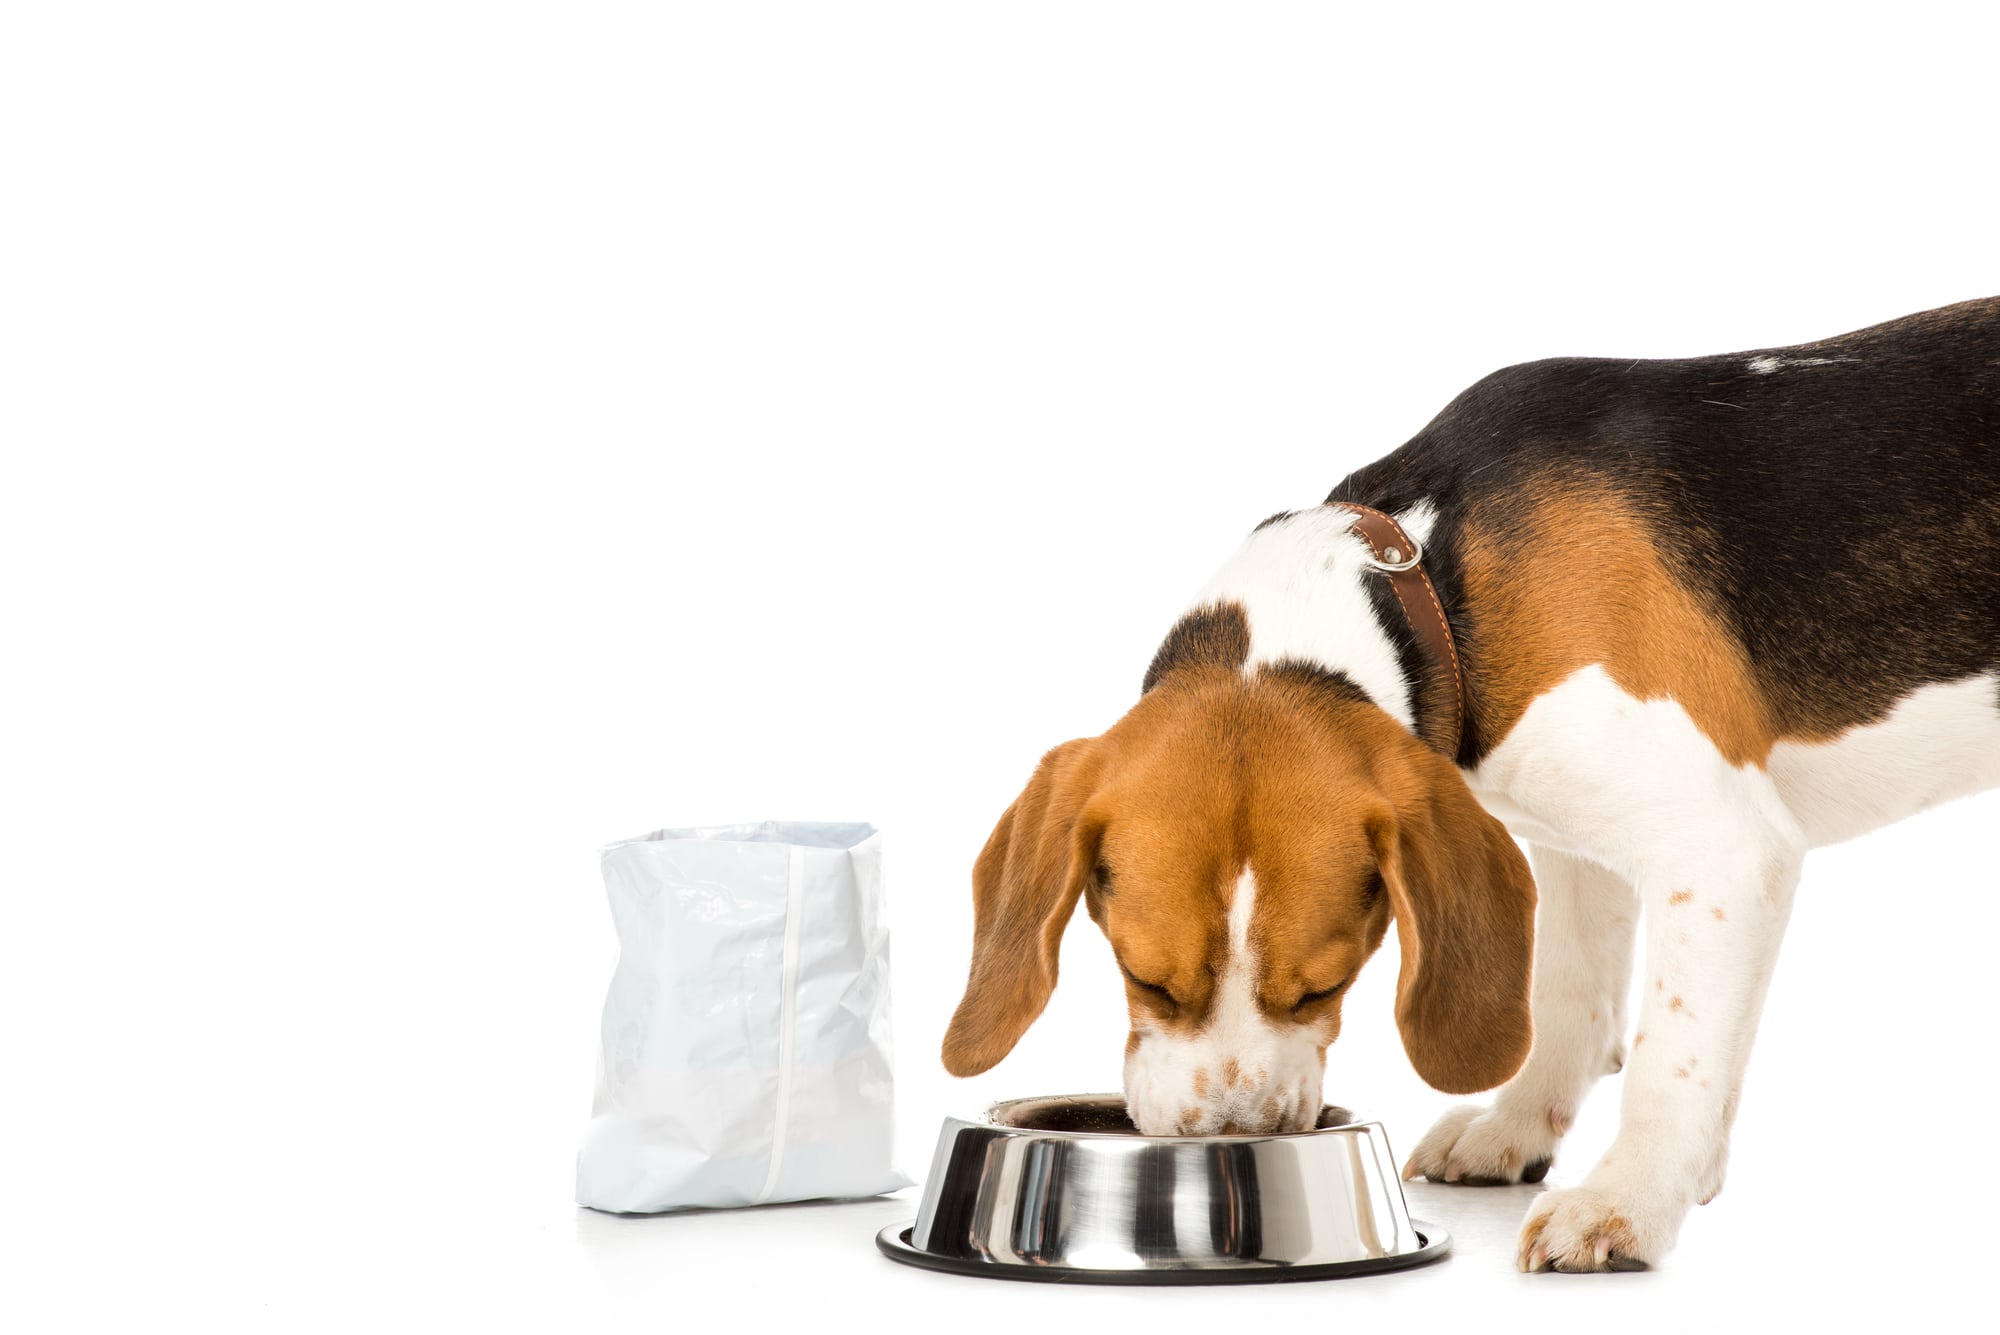 Can You Trust That Dog Food Label?